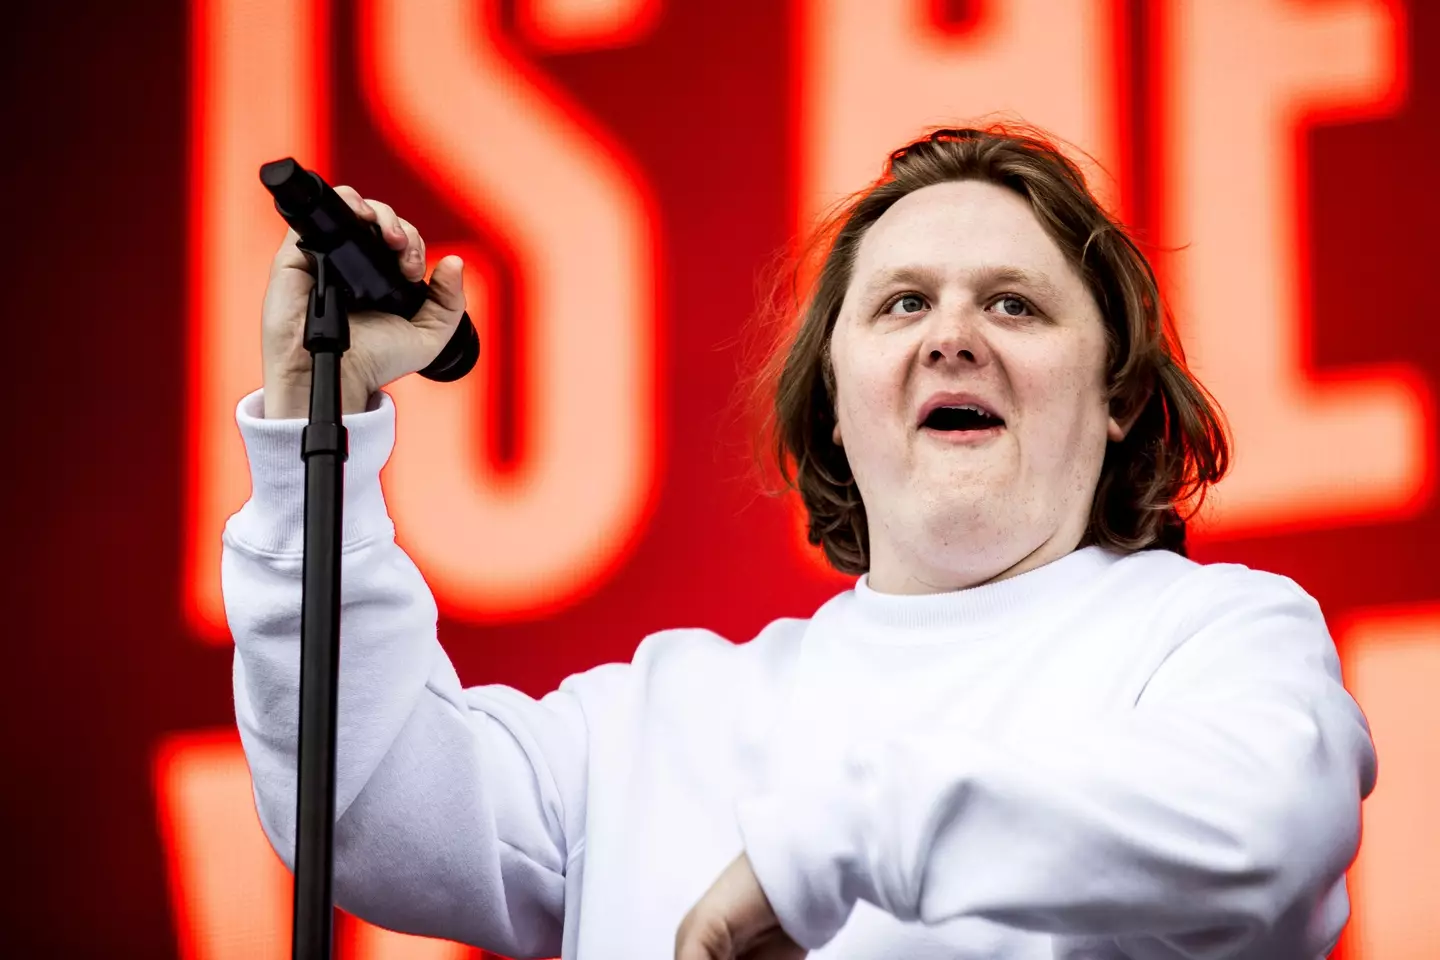 Fans are calling for Lewis Capaldi to do comedy performances.